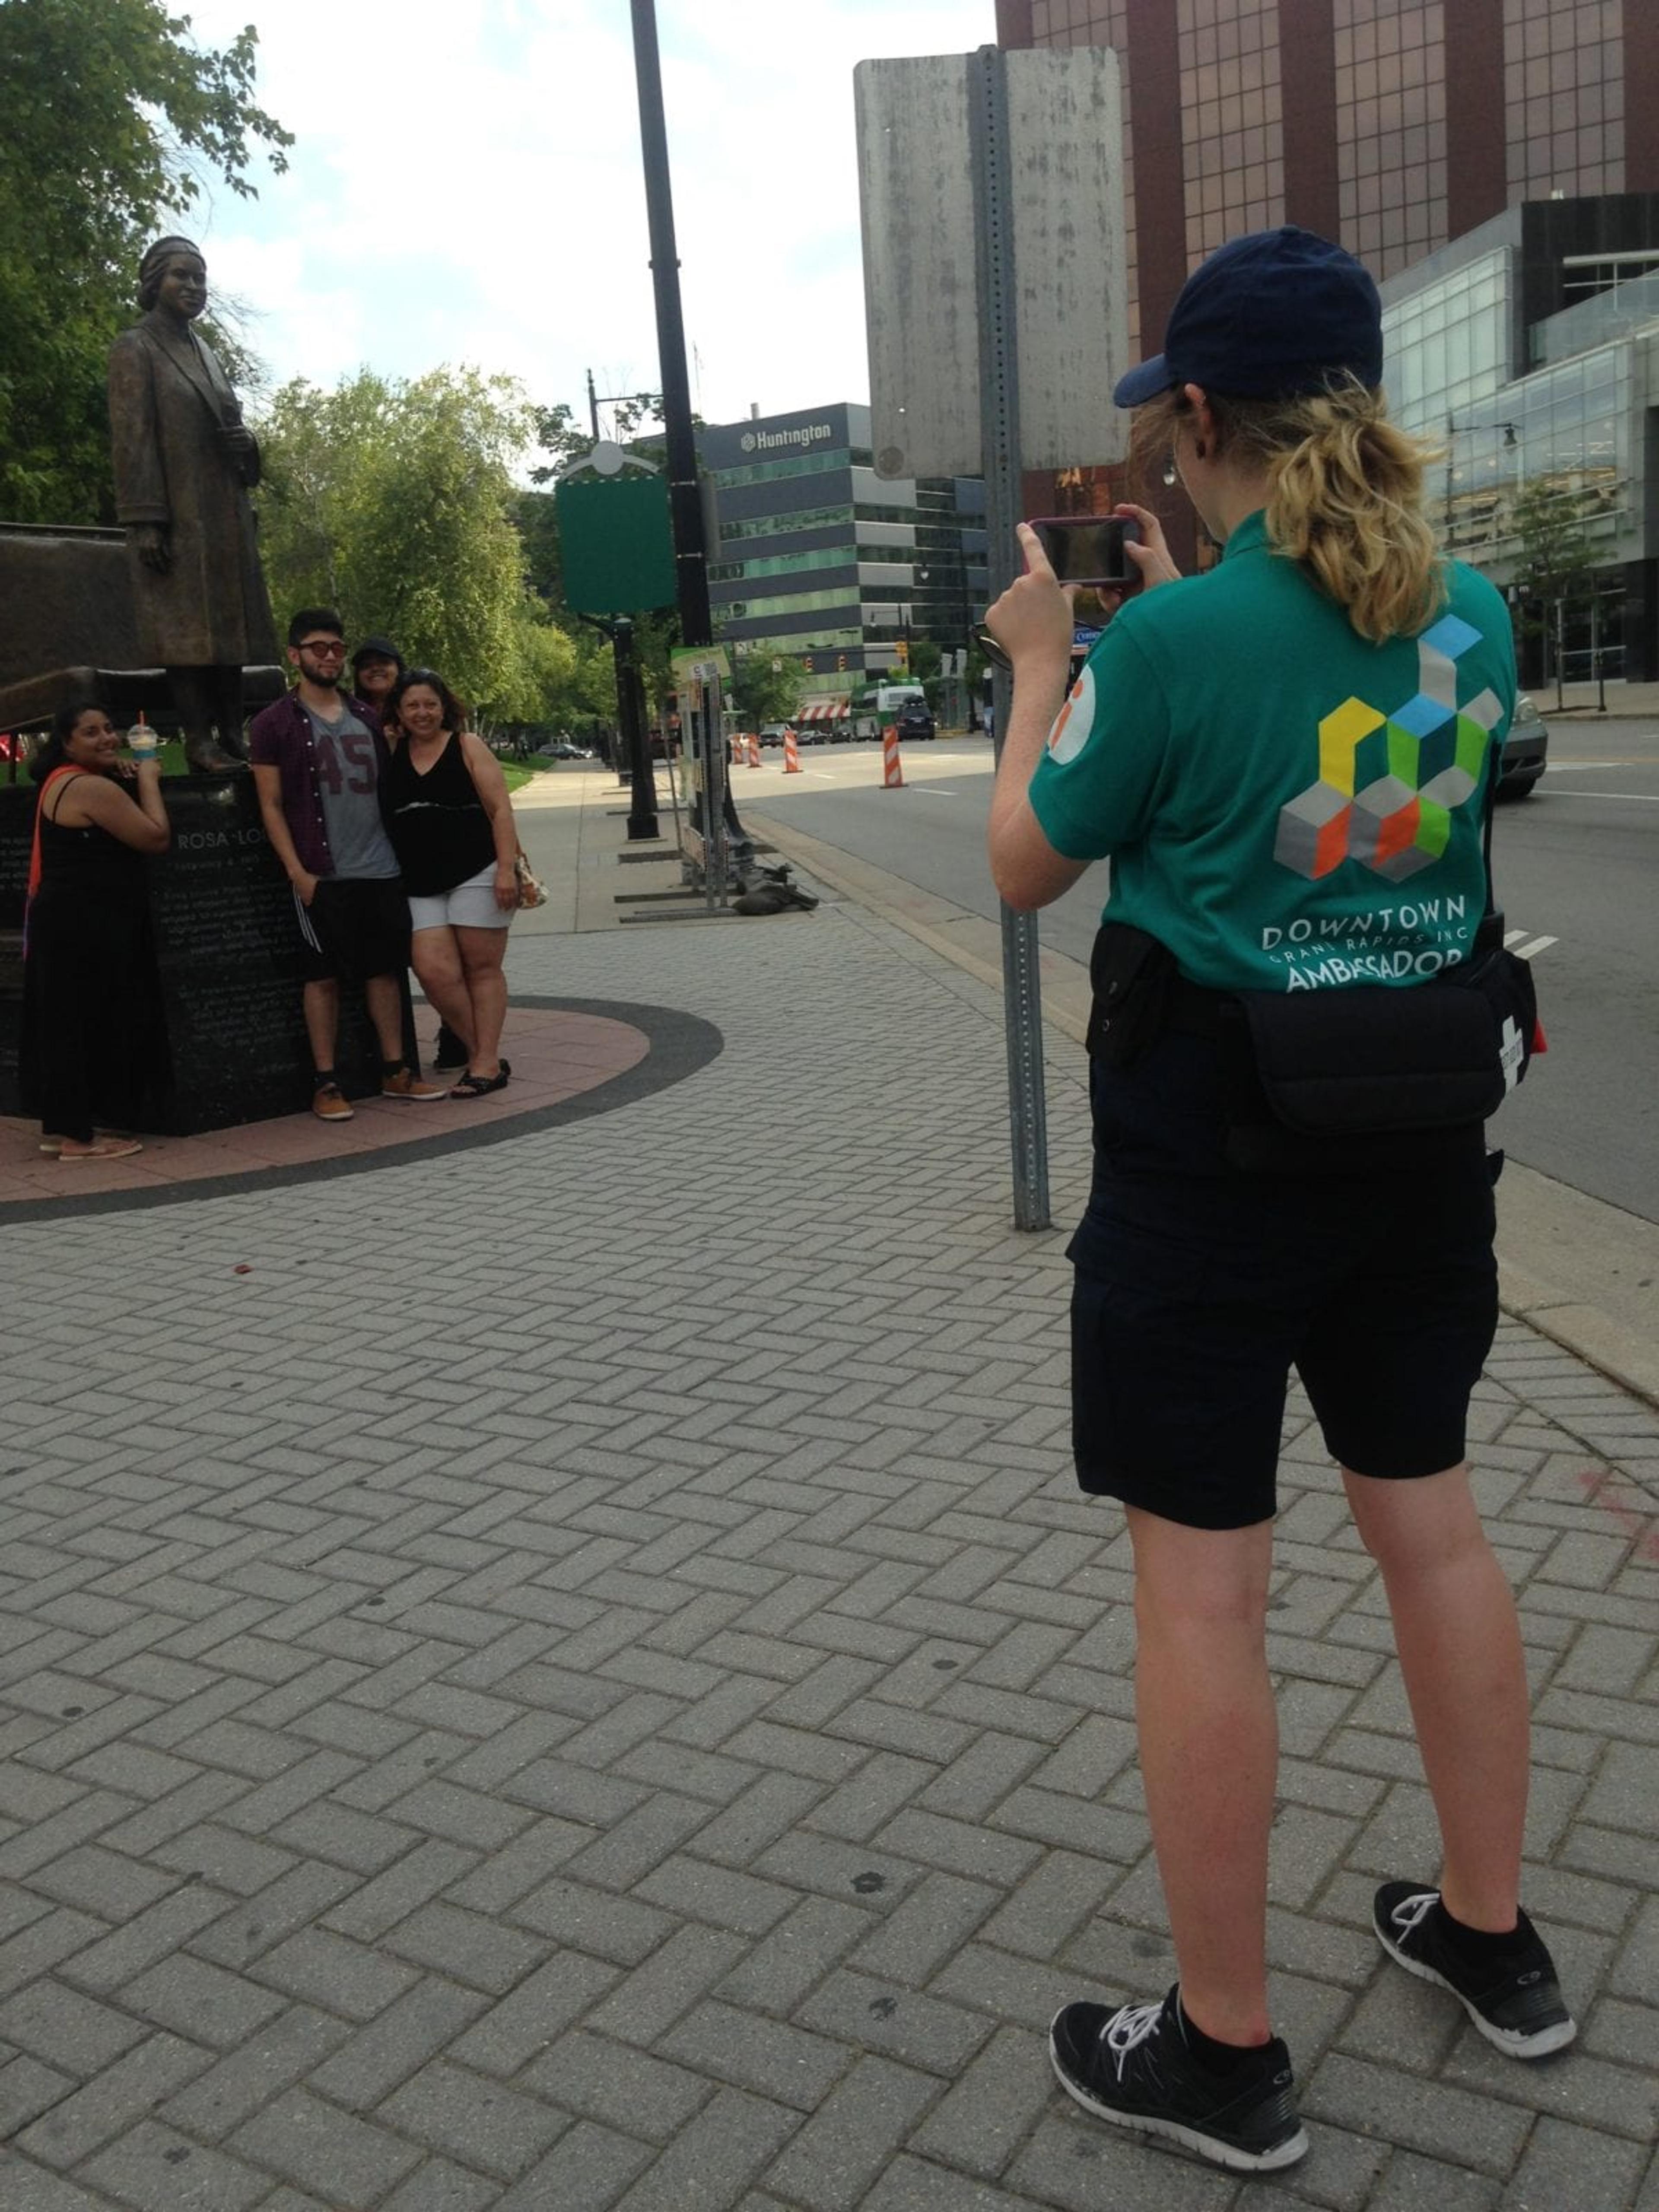 A Grand Rapids ambassador stops to take a picture for visitors to downtown.